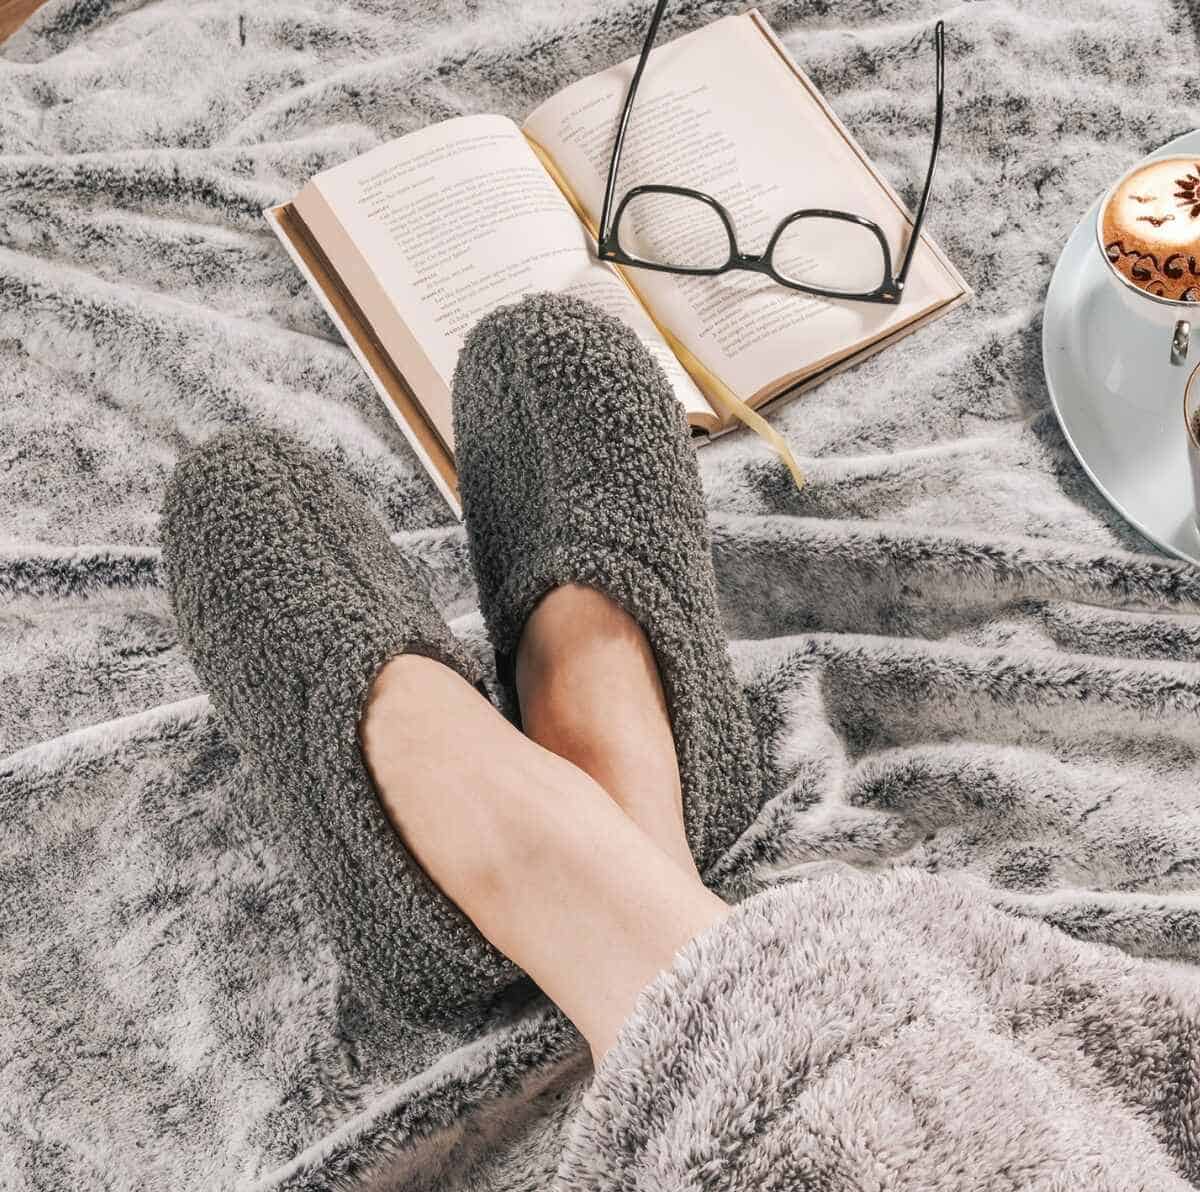 A dark gray pair of Rock Dove's indoor fuzzy fleece slippers on a woman's crossed feet surrounded by an open book with glasses and a luxurious gray blanket. 